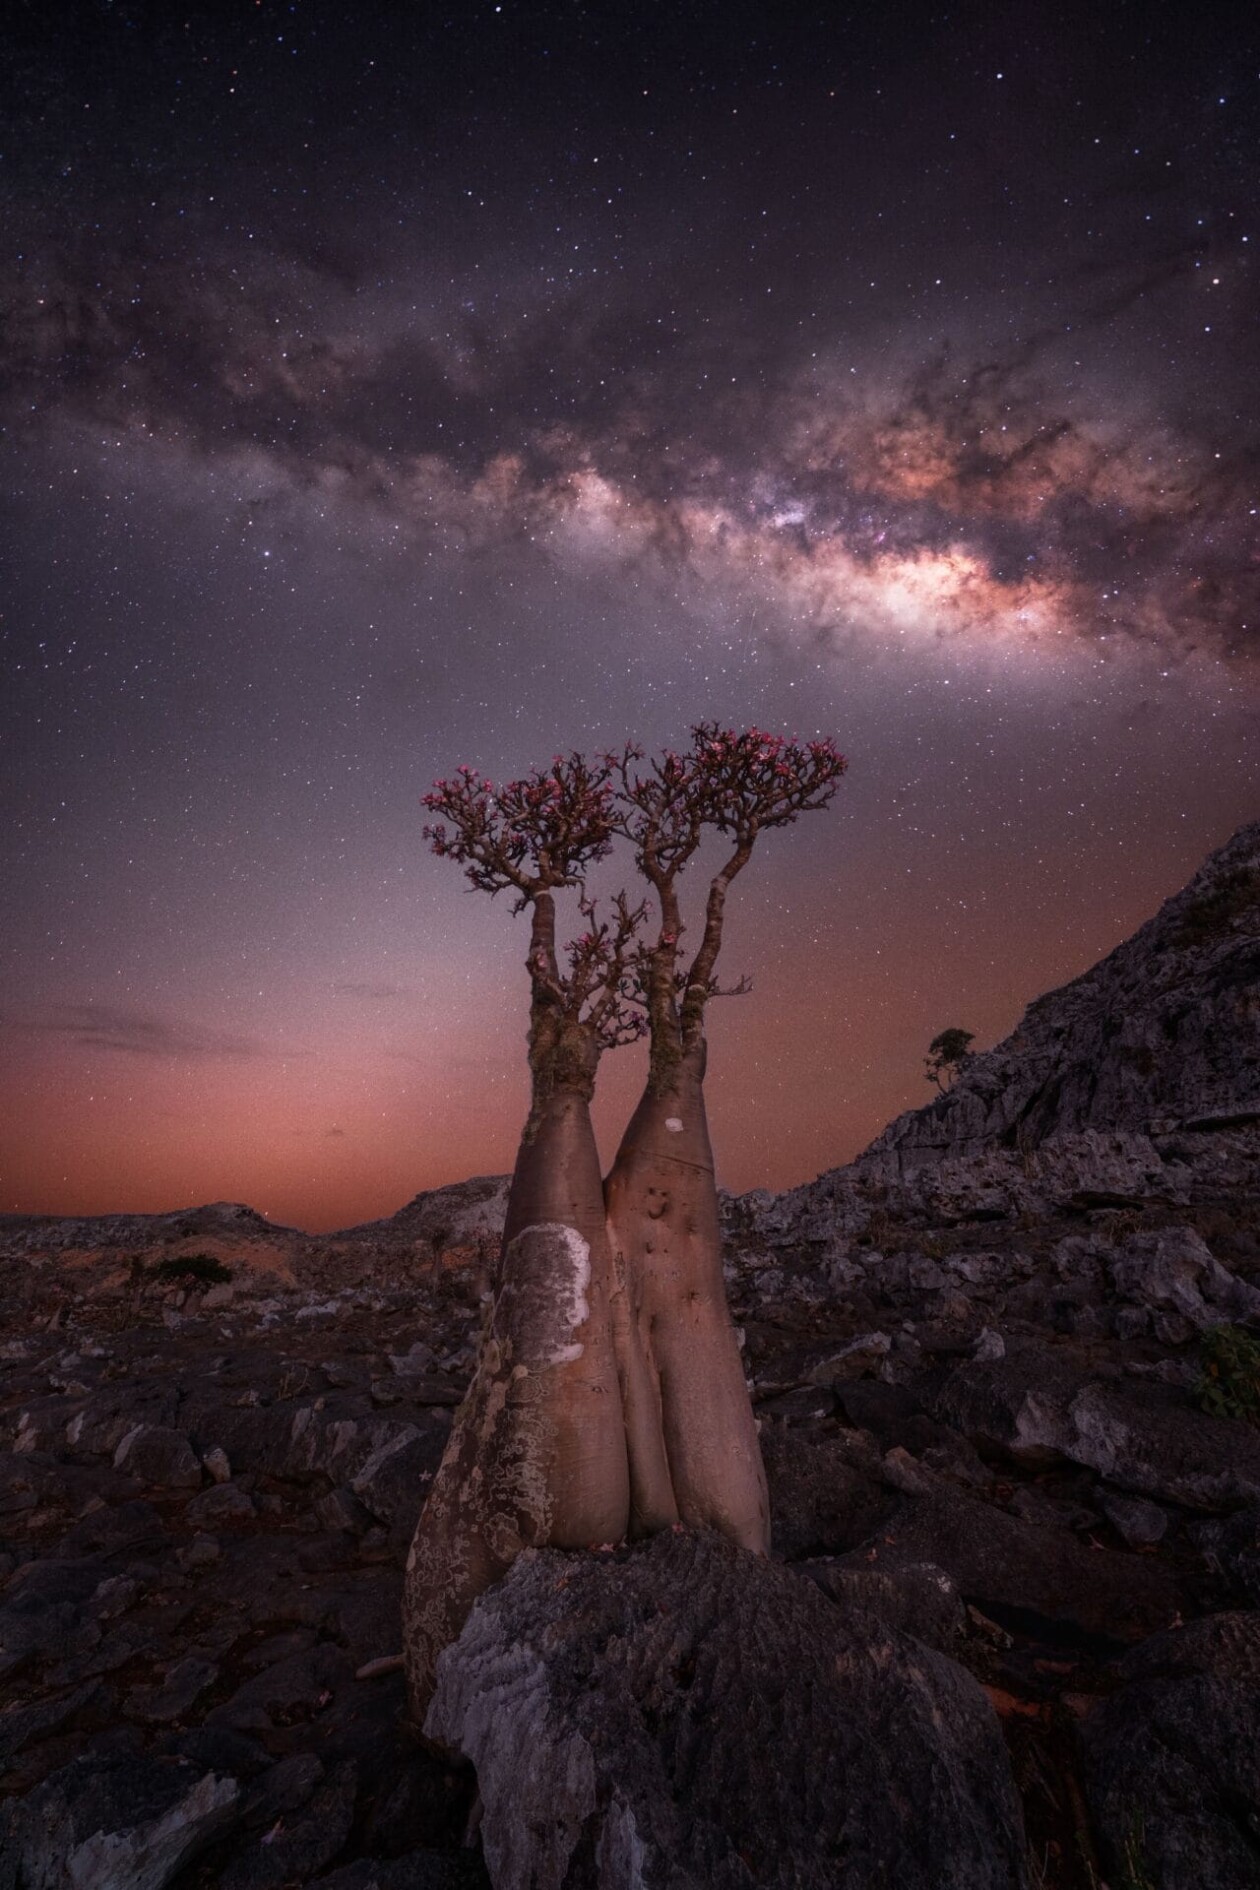 Capturing The Celestial Majesty In The Milky Way Photographer Of The Year Contest (8)